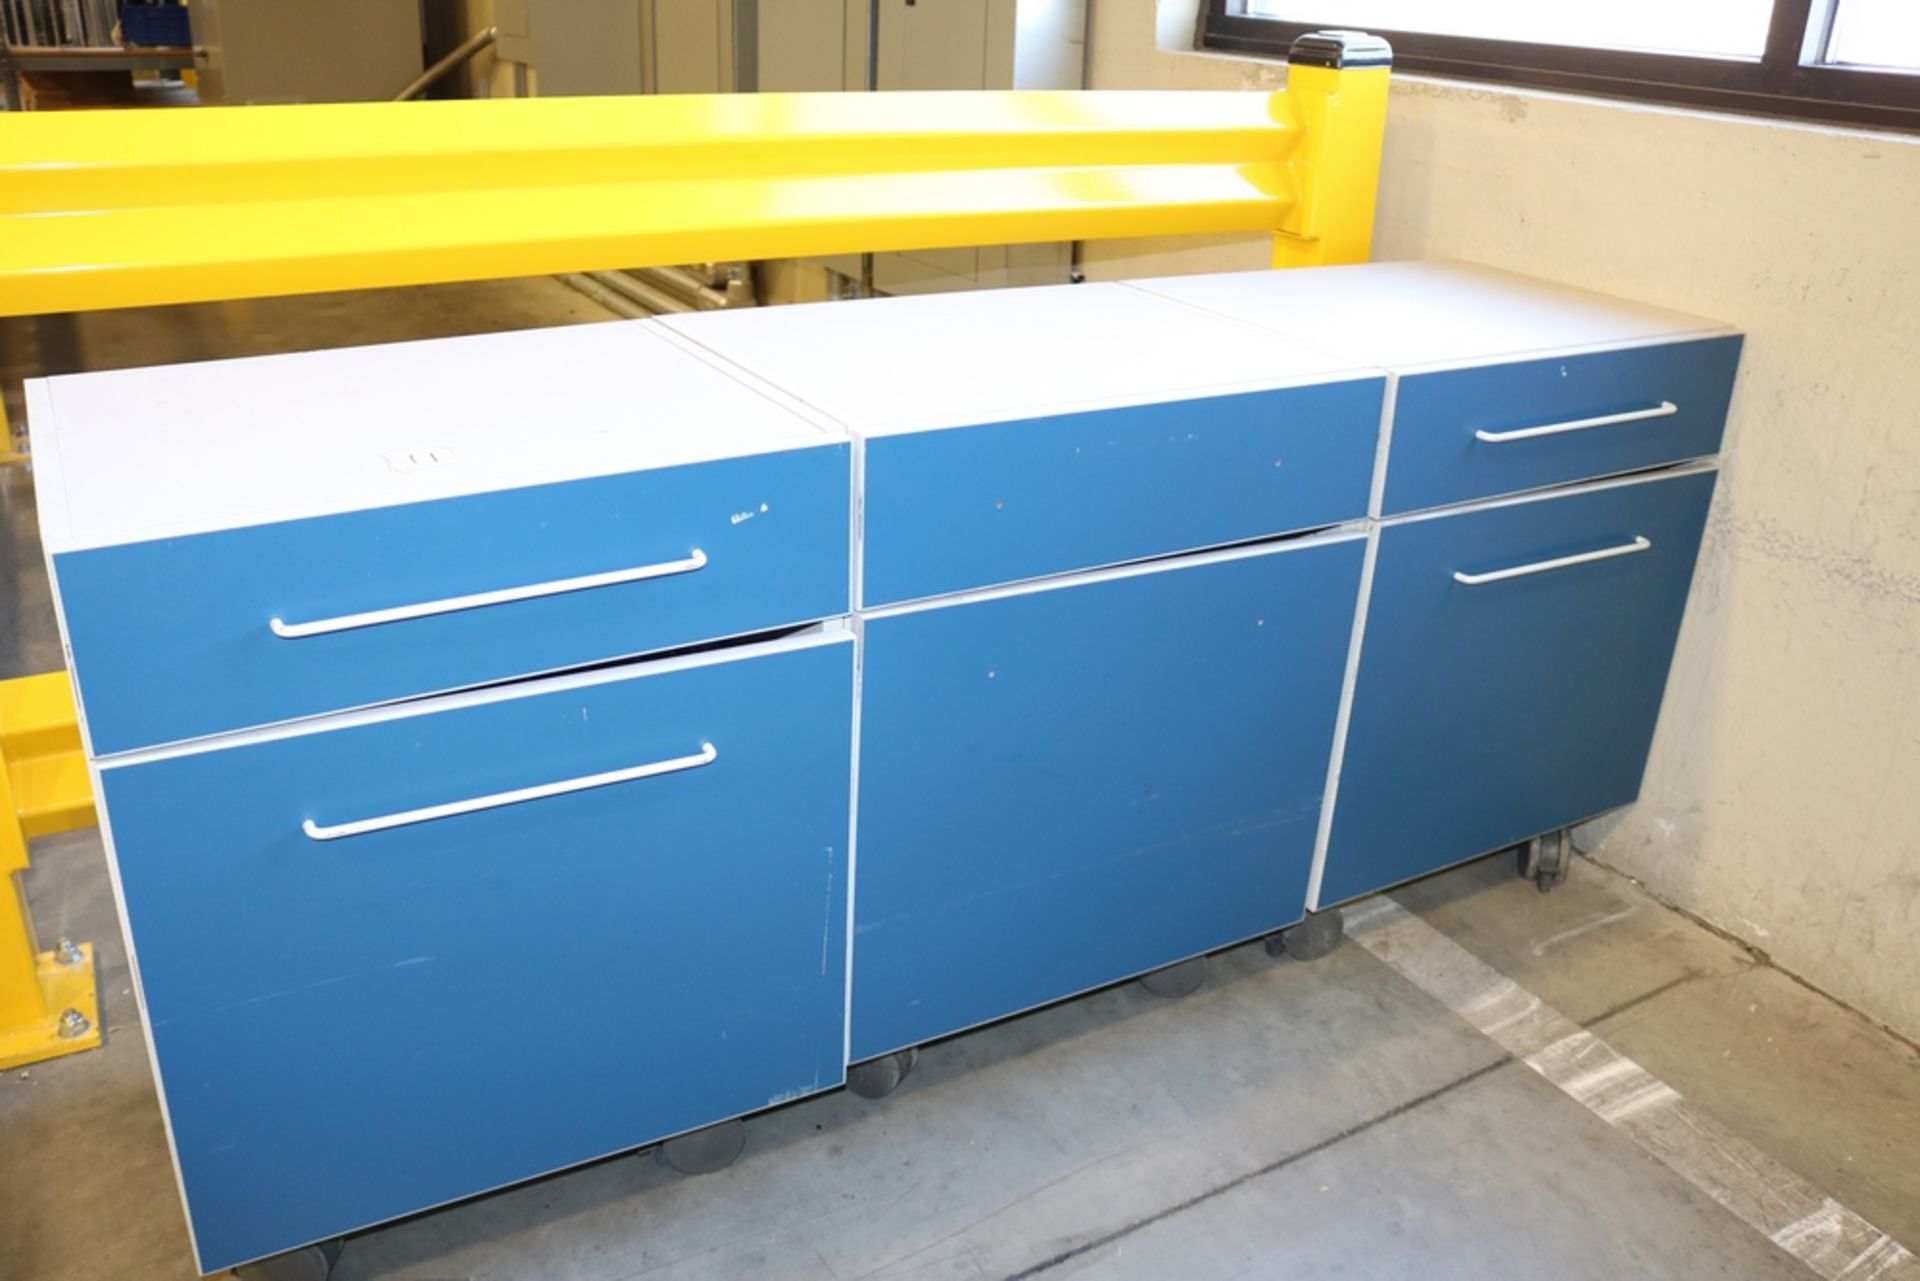 (3) Rolling Office Cabinet With Contents, Tools, Inspection Materials and Others